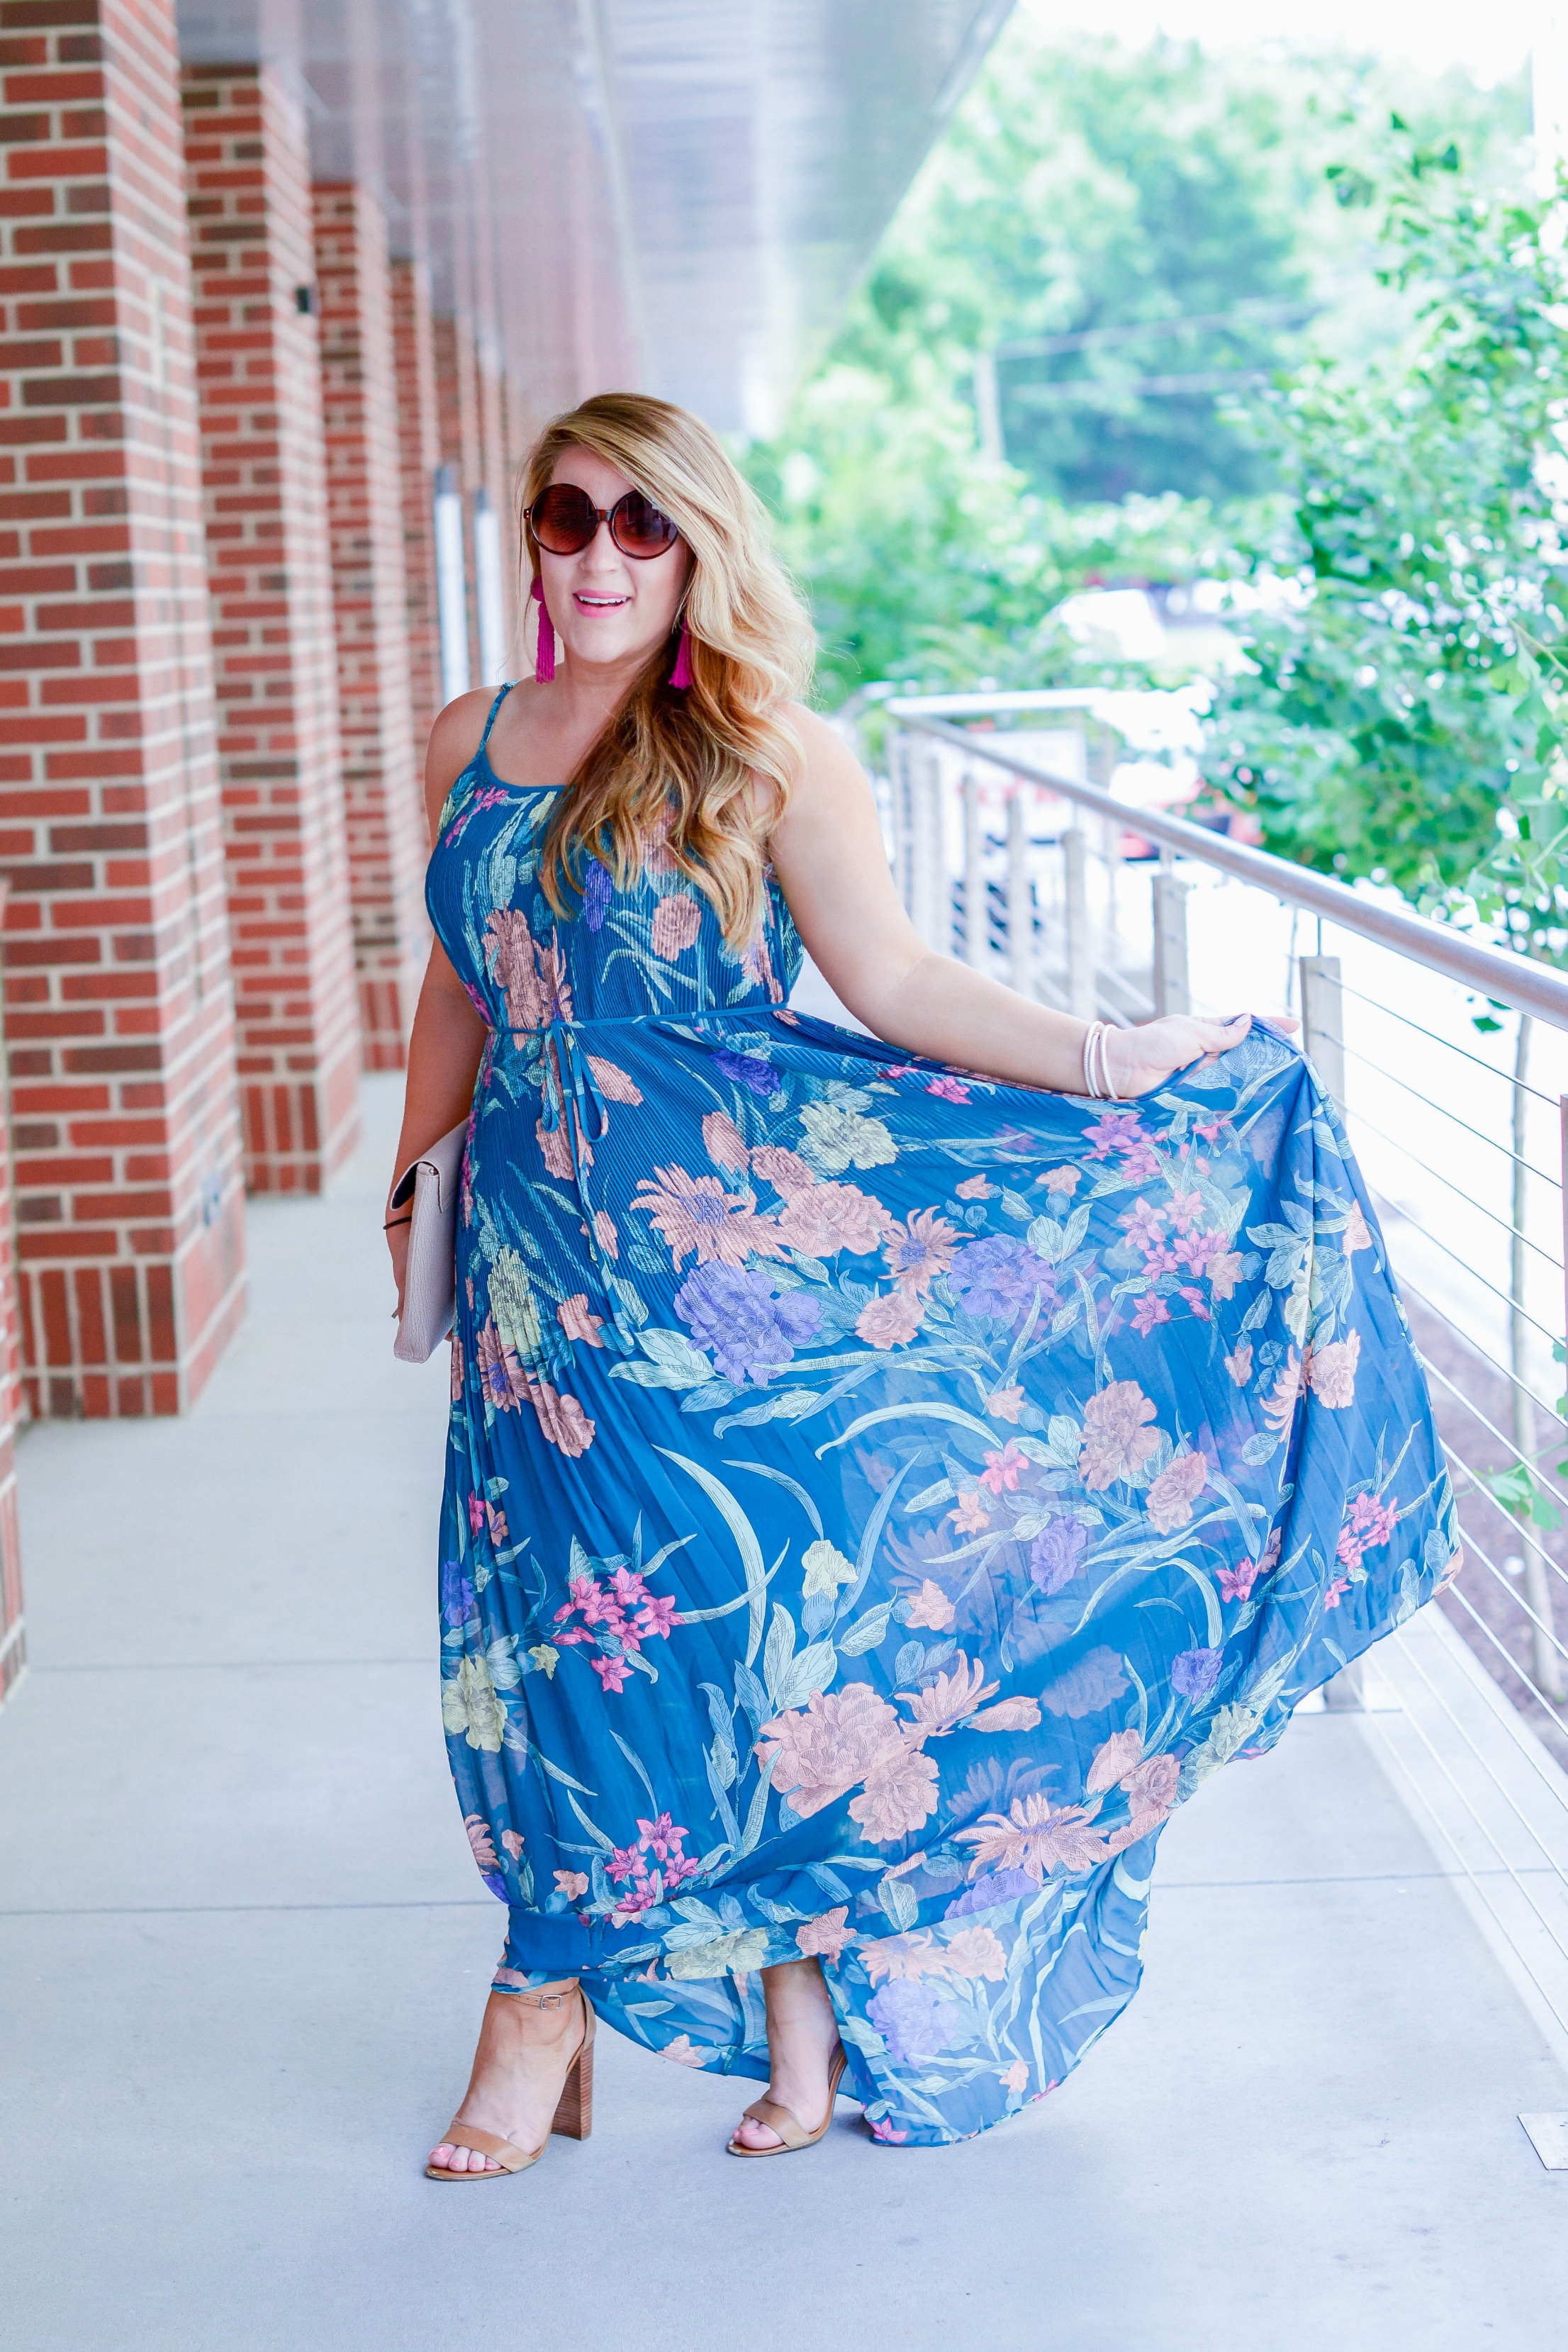 Short Girl's Guide On How To Wear A Maxi Dress by NC fashion blogger Amy of Coffee Beans and Bobby Pins